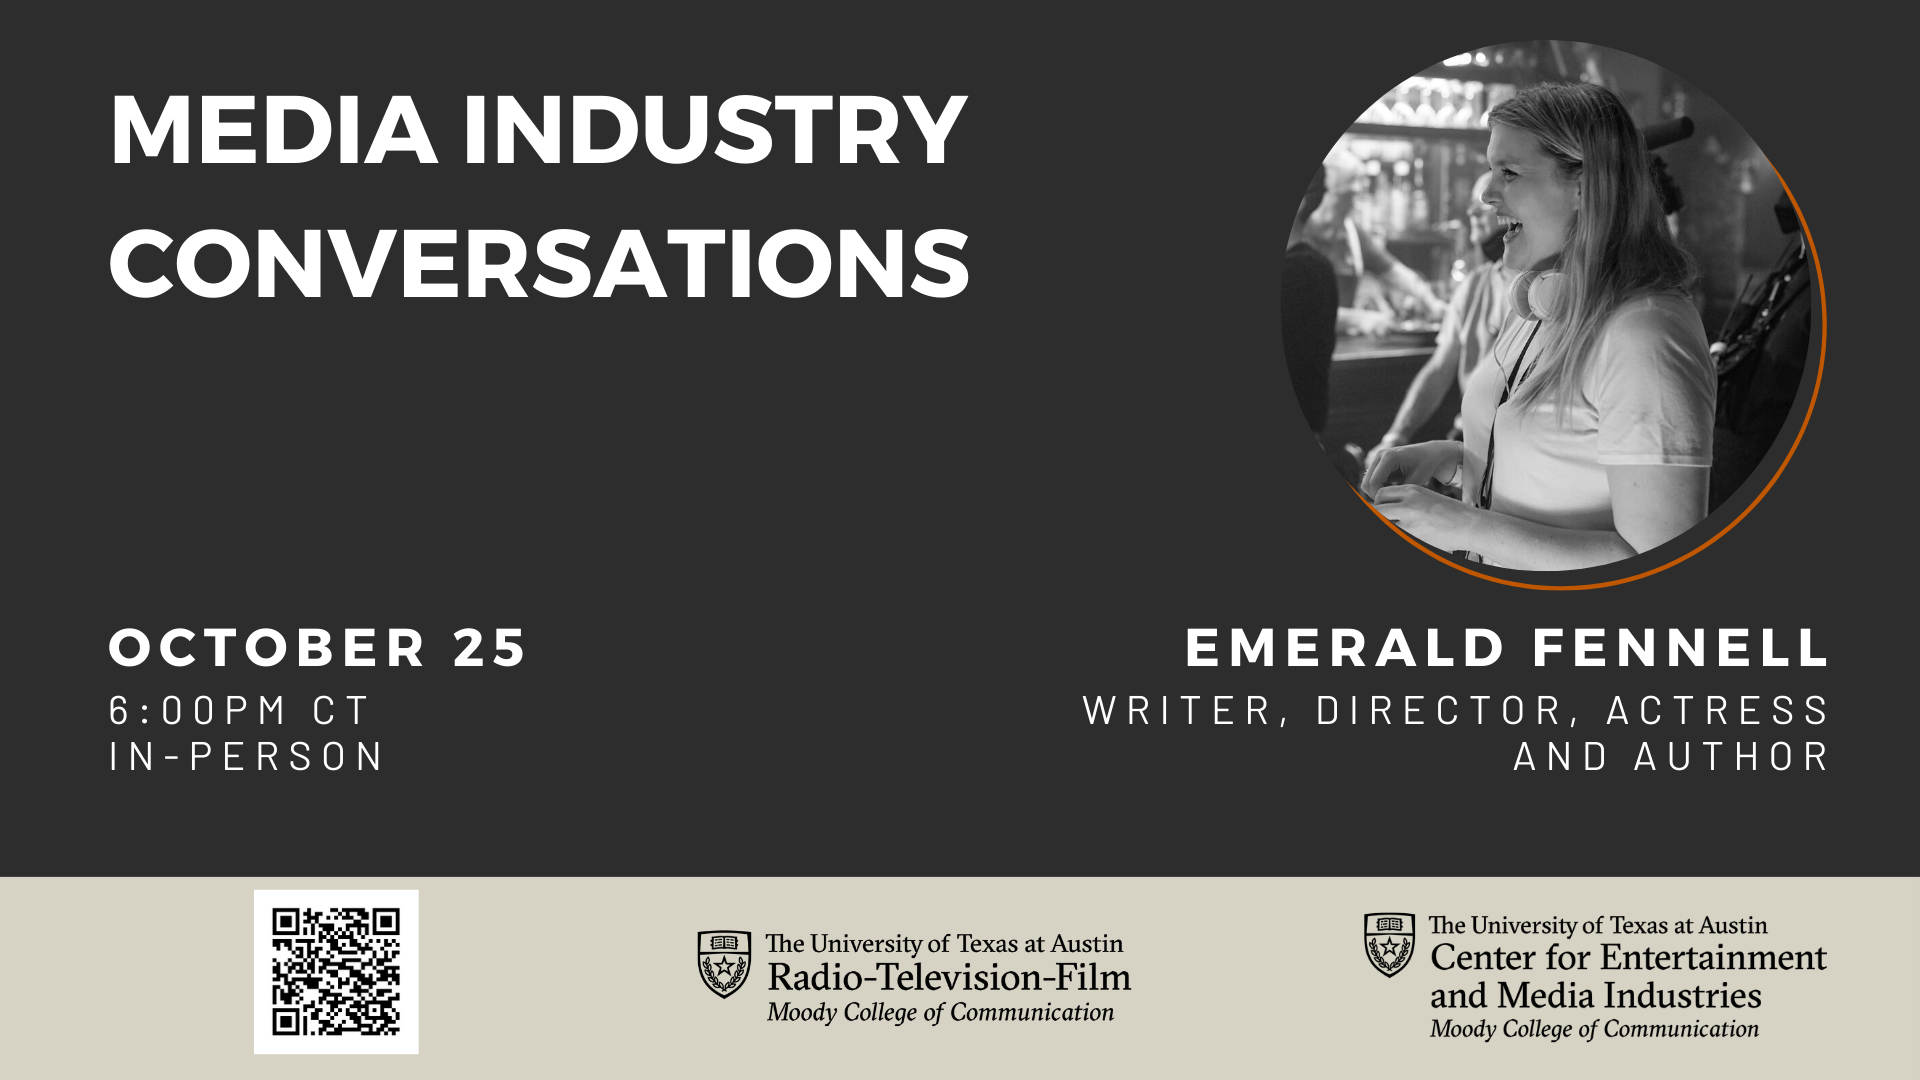 Emerald Fennell, Writer, Director, Actress, Author, October 25, 6pm, In-Person